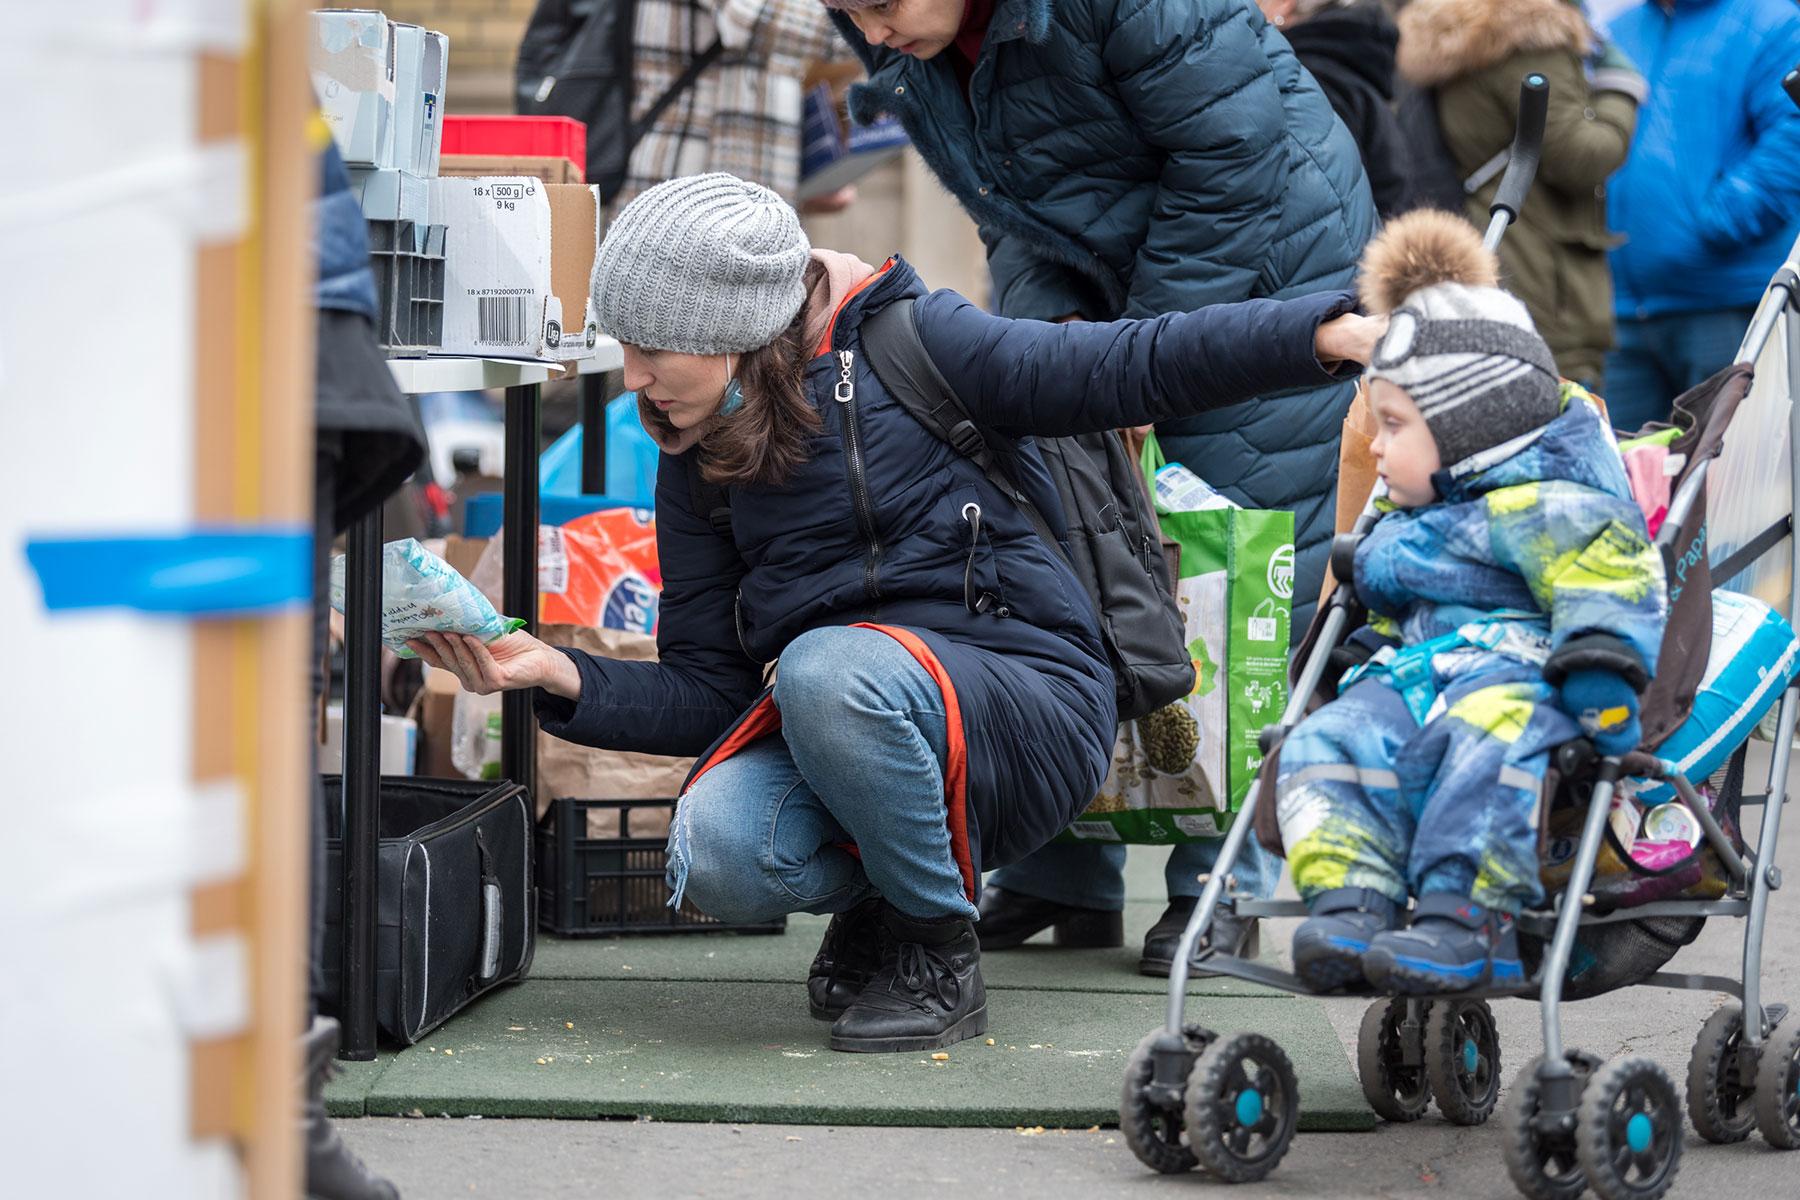 Ukrainian refugee woman Alona looks at supplies at one of the aid workersâ stands at Nyugati train station in Budapest. Alona, her 1.5-year-old son, and her mother arrived from Ukraine on 6 March, following a 26-hour long journey from the capital city Kyiv. All photos: LWF/Albin Hillert